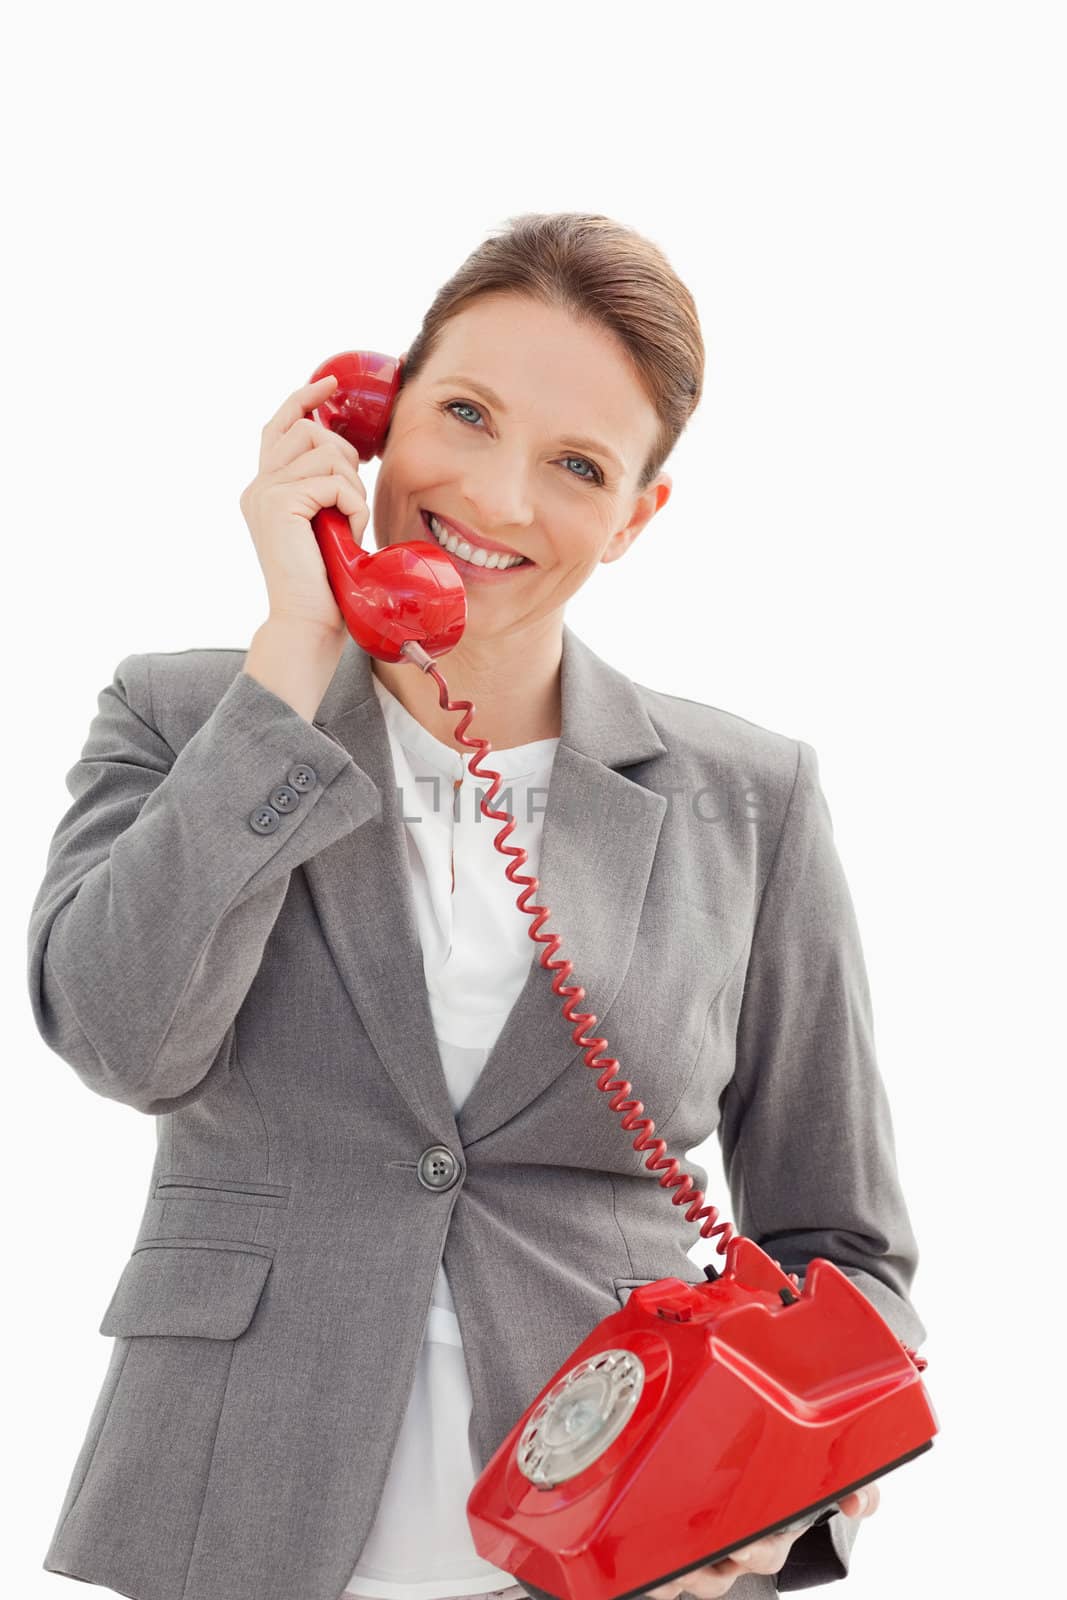 A happy businesswoman is talking on the phone